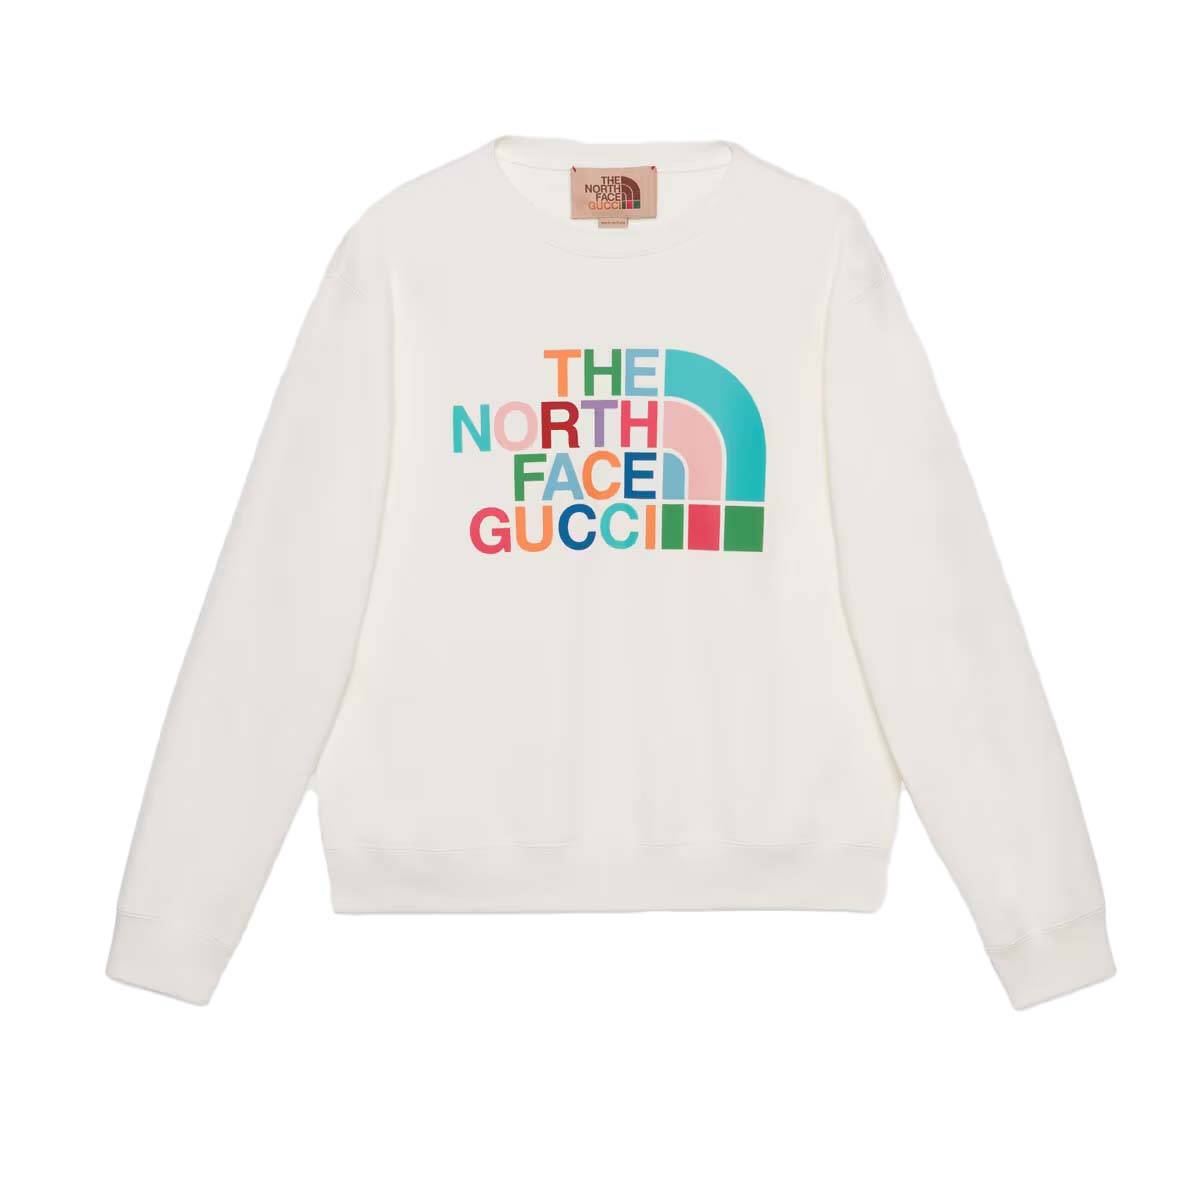 Gucci x The North Face Sweatshirt Ivory/Multicolor